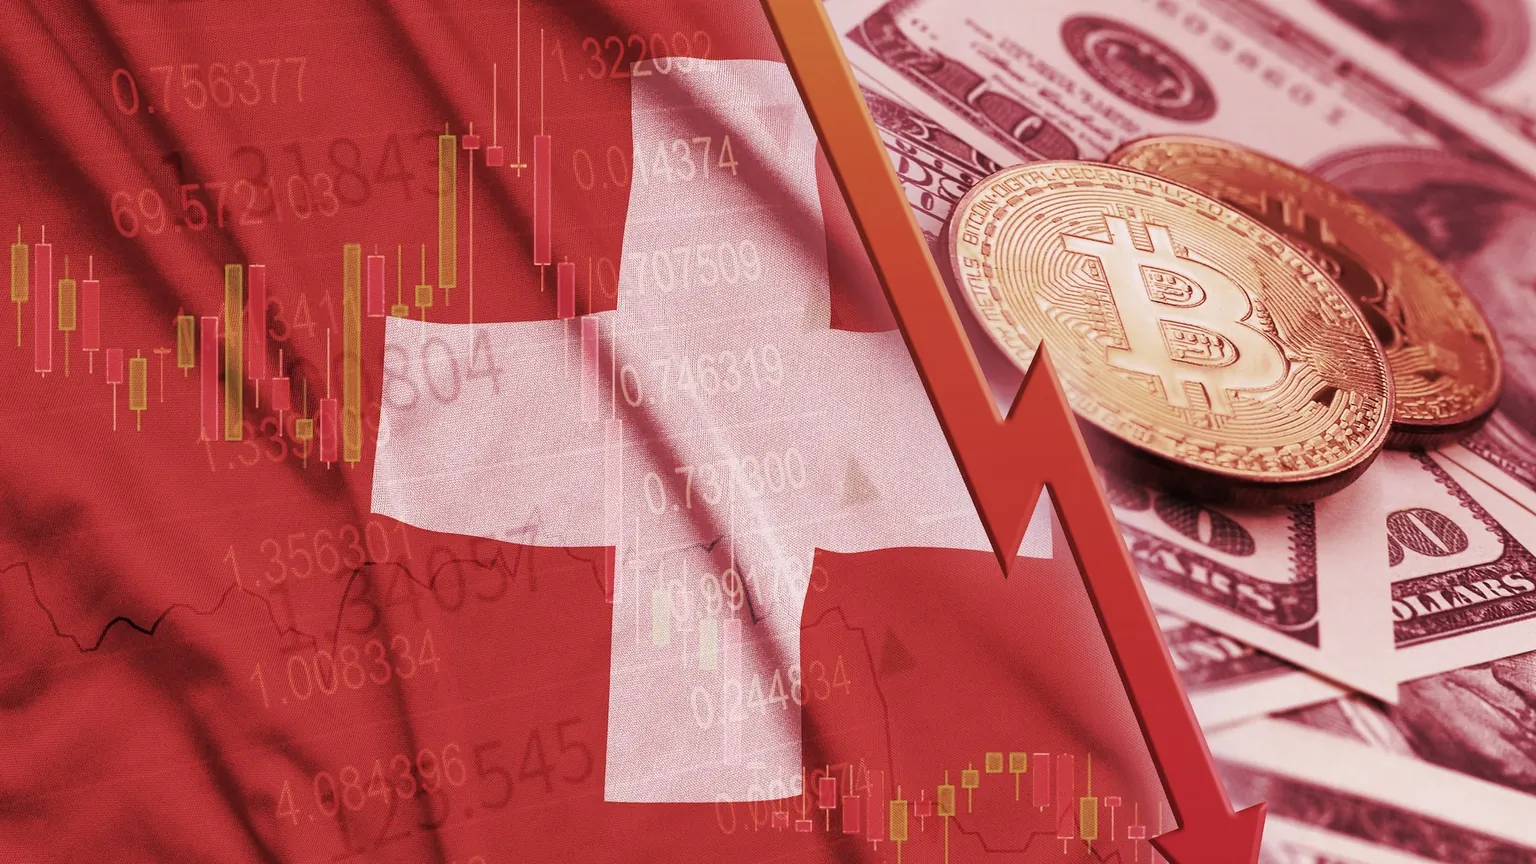 Switzerland has one of the most crypto-friendly regulatory regimes in the world. Image: Shutterstock